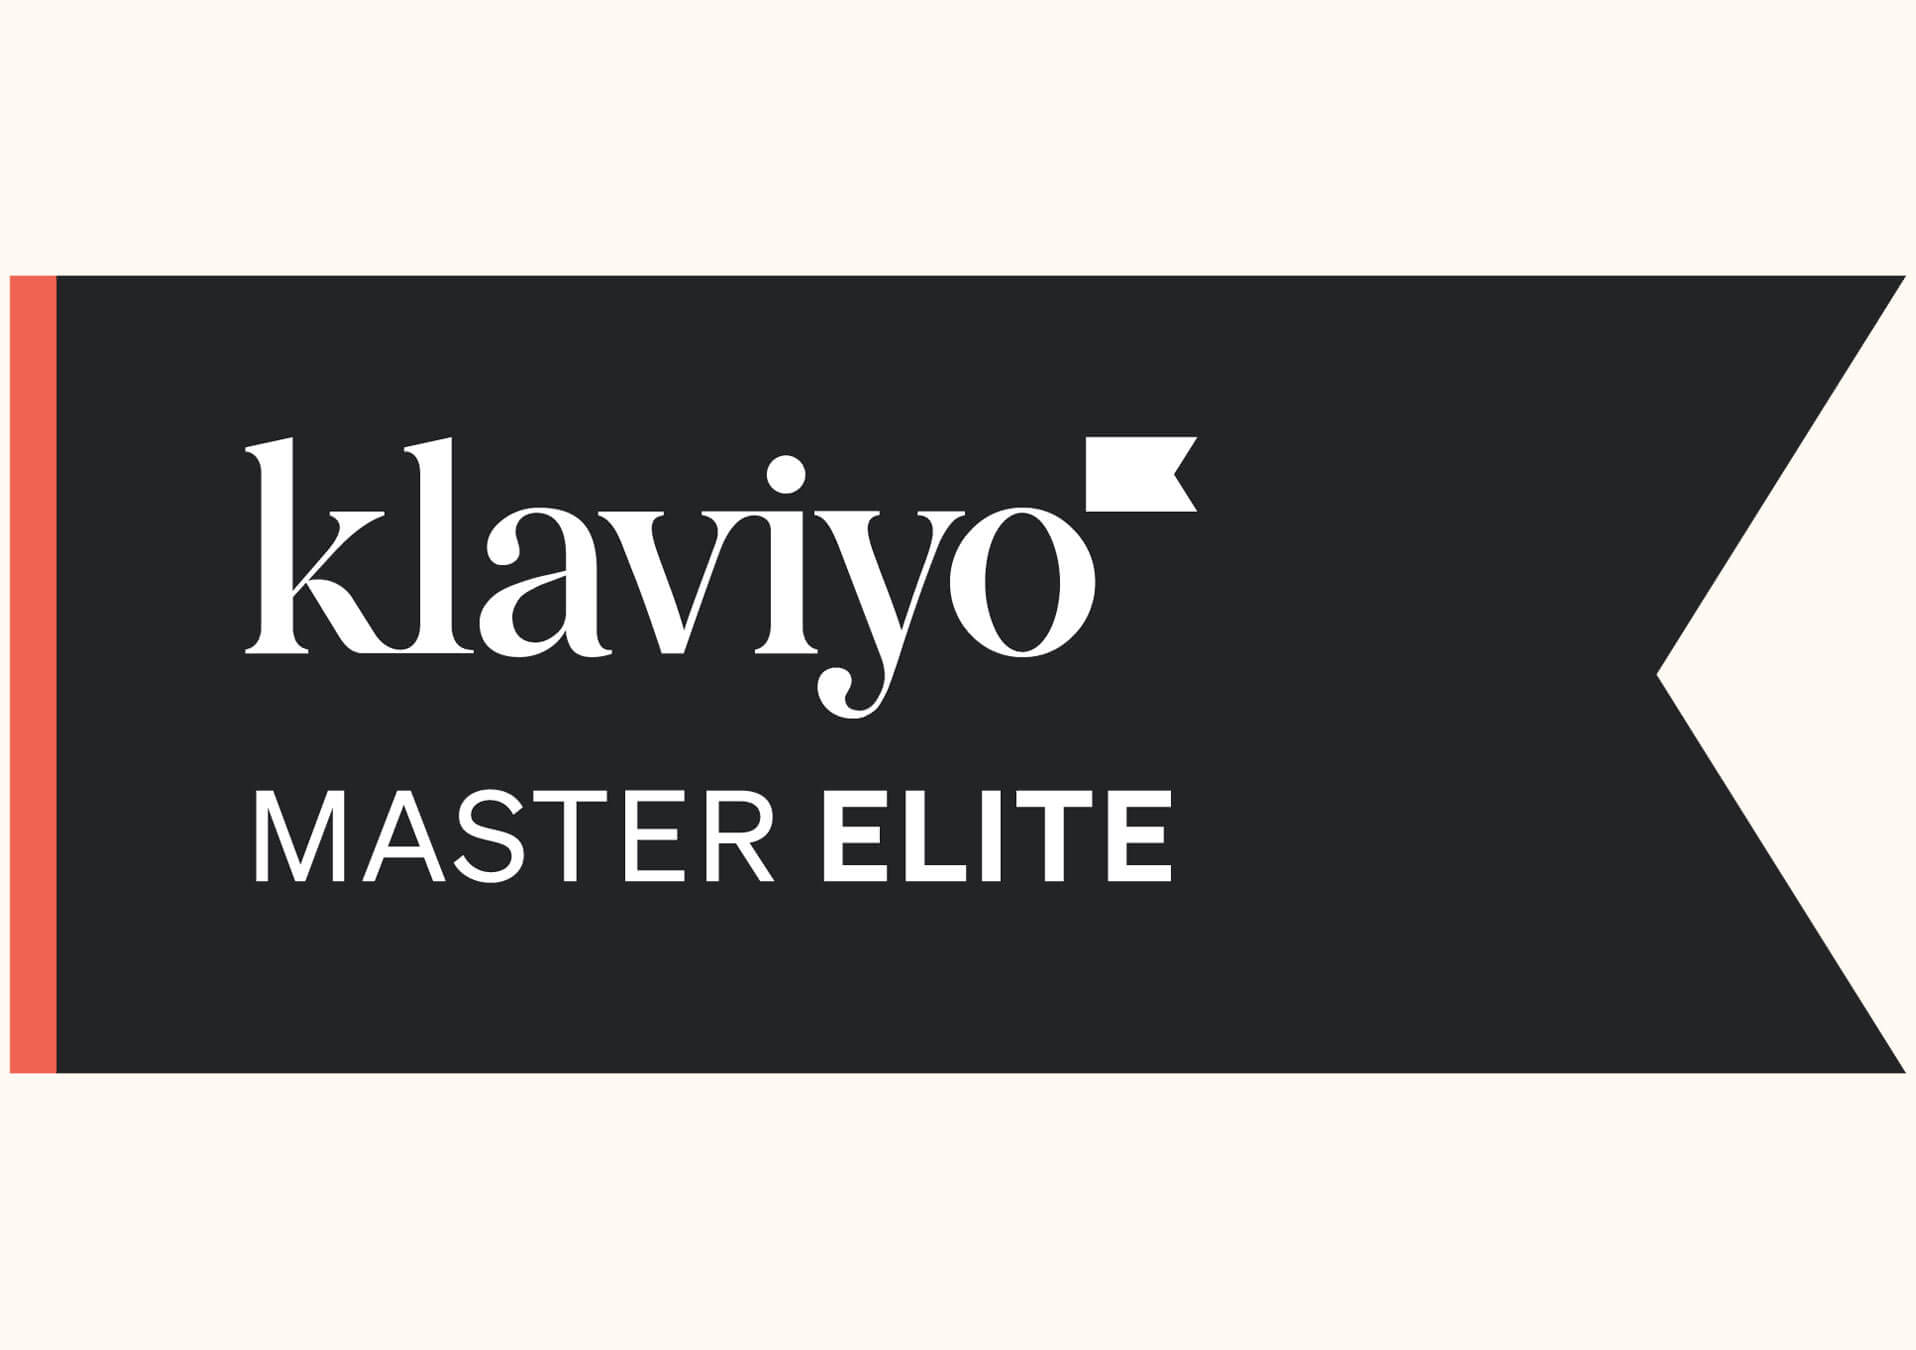 Andzen Has Just Become the First-Ever Klaviyo Elite Master Partner Outside of the USA